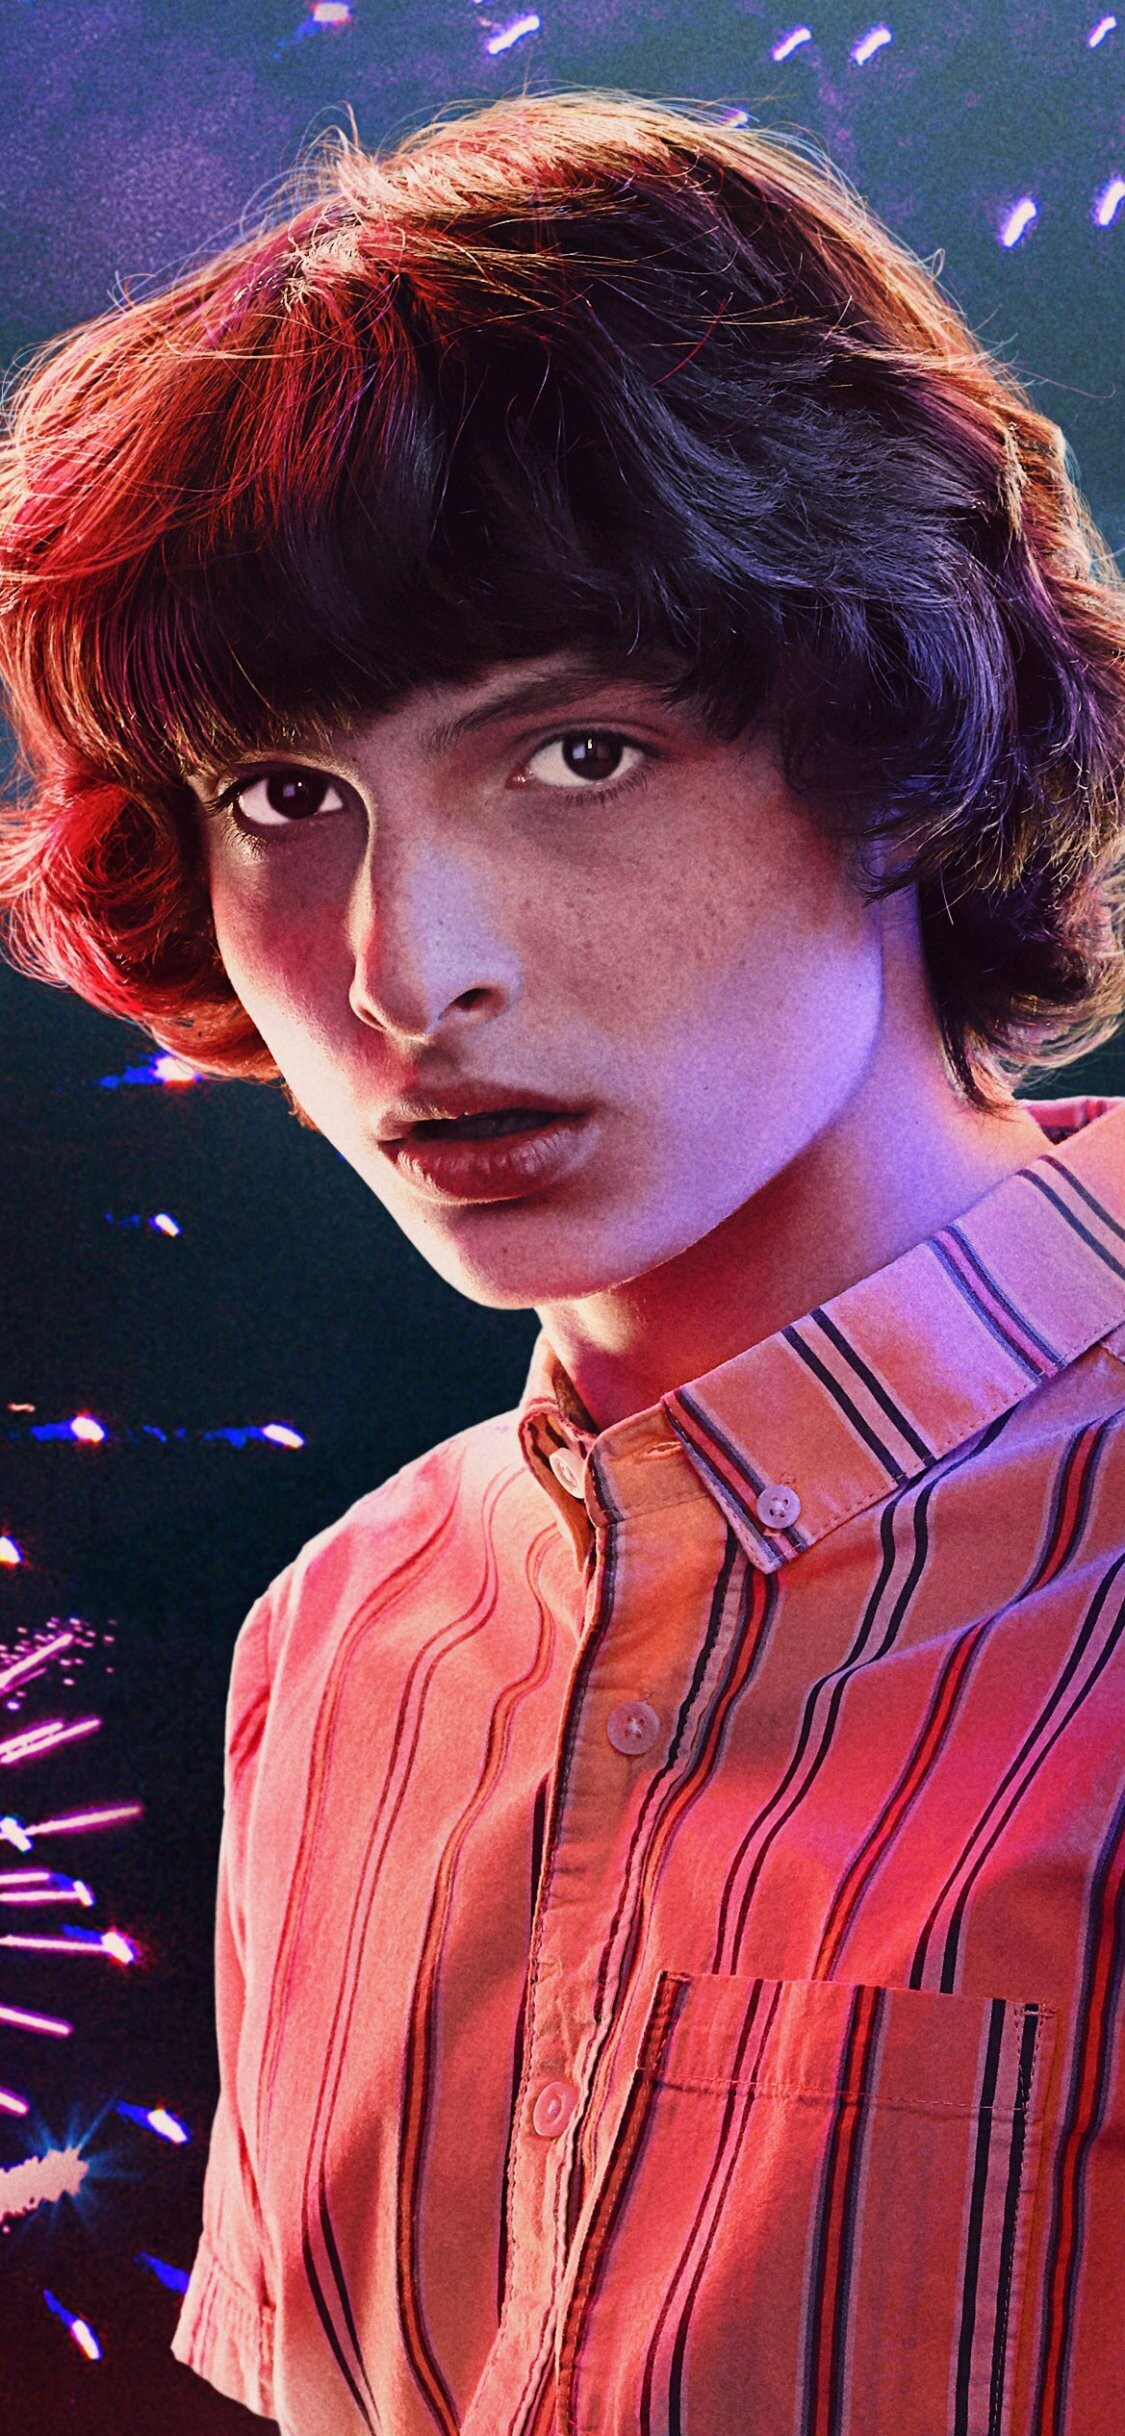 Stranger Things: TV show, Finn Wolfhard as Mike Wheeler, brother of Nancy and Holly. 1130x2440 HD Wallpaper.